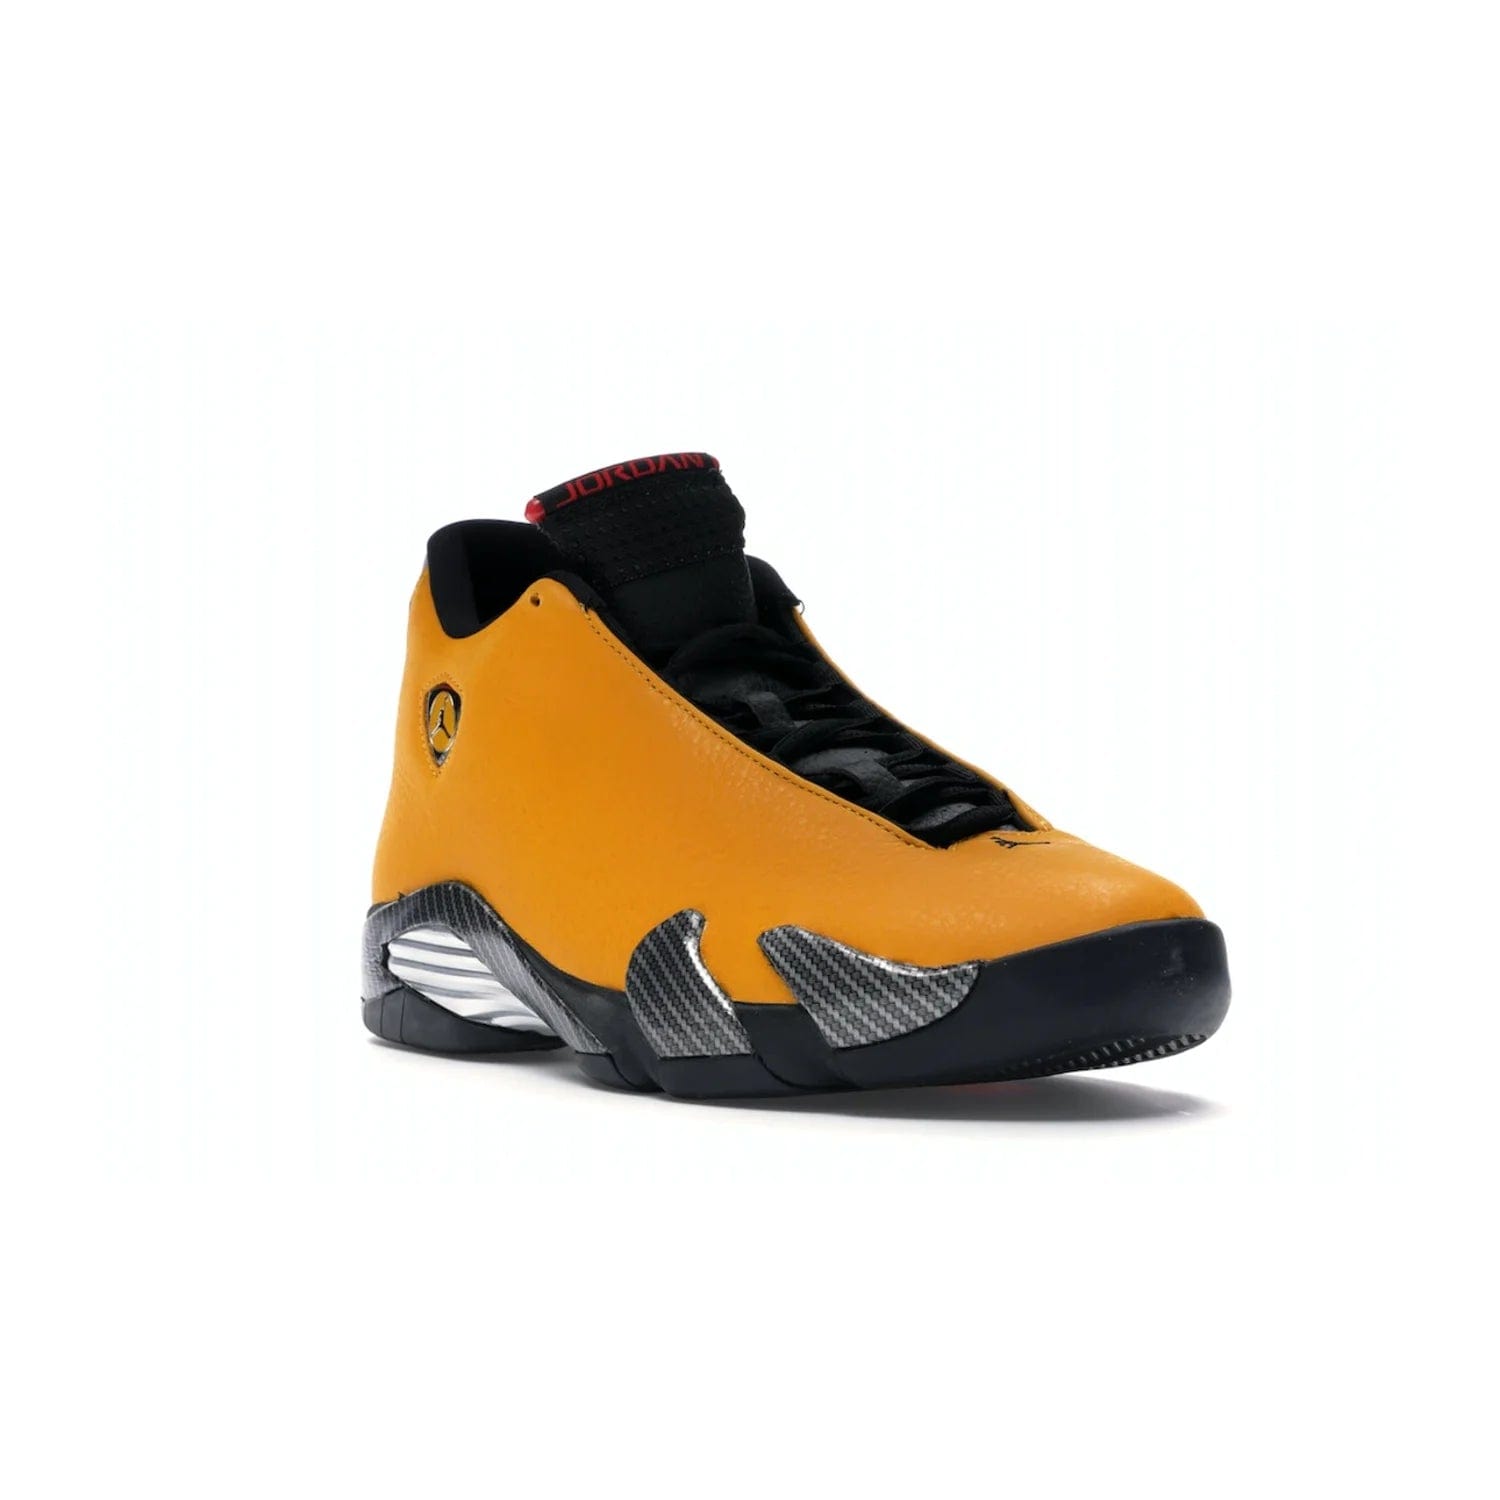 Jordan 14 Retro University Gold - Image 6 - Only at www.BallersClubKickz.com - Air Jordan 14 Retro University Gold: High-quality leather sneaker with Jumpman, tongue & heel logos. Zoom Air units & herringbone traction for superior comfort. University Gold outsole for stylish streetwear.